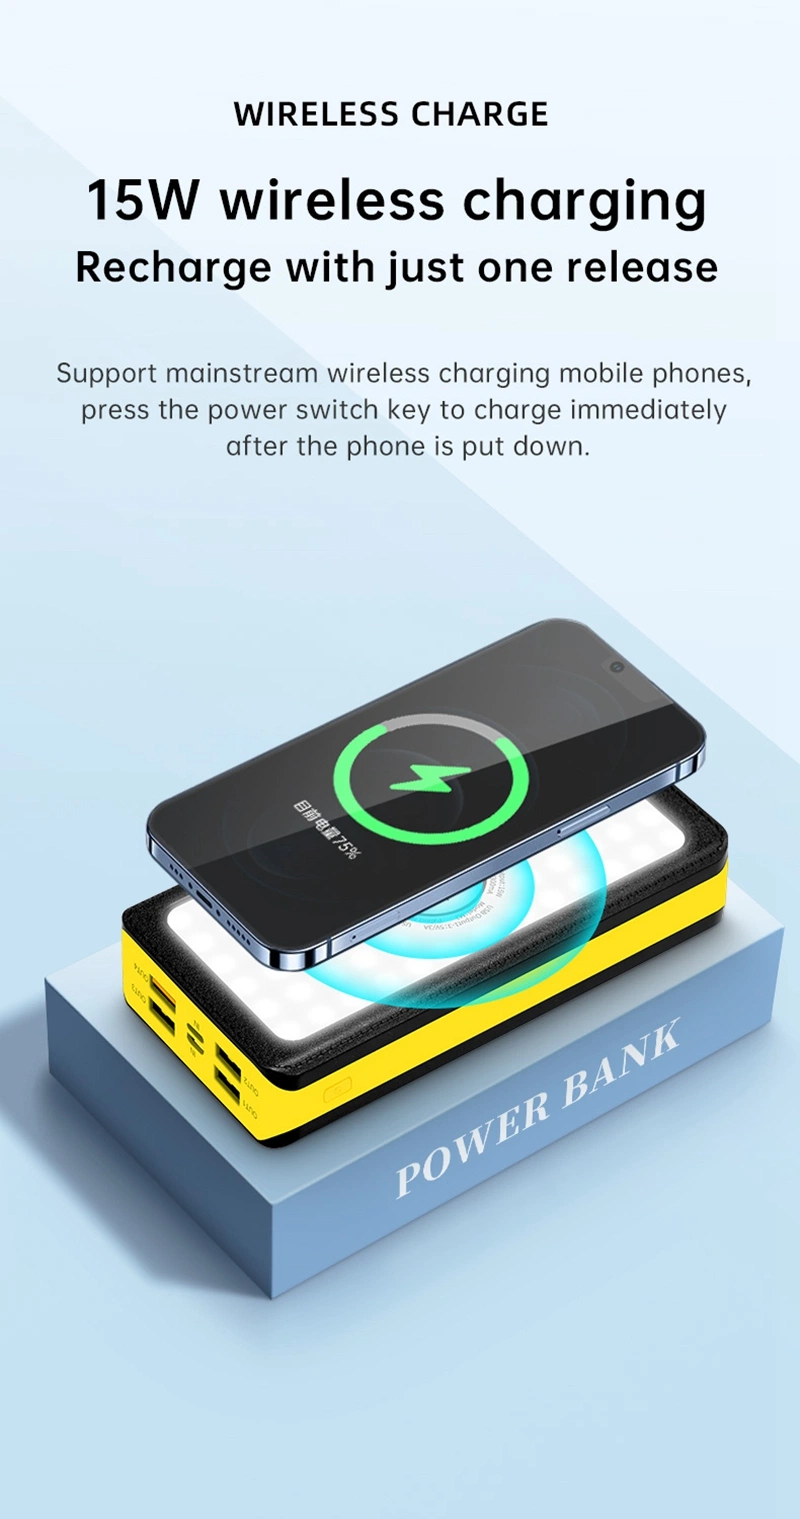 Factory Travel Style 30000mAh Big Capacity Outdoor Power Bank 6output 2 Input Support Mobile Wireless Charging Pd 22.5W Fast Solar USB Phone Charger